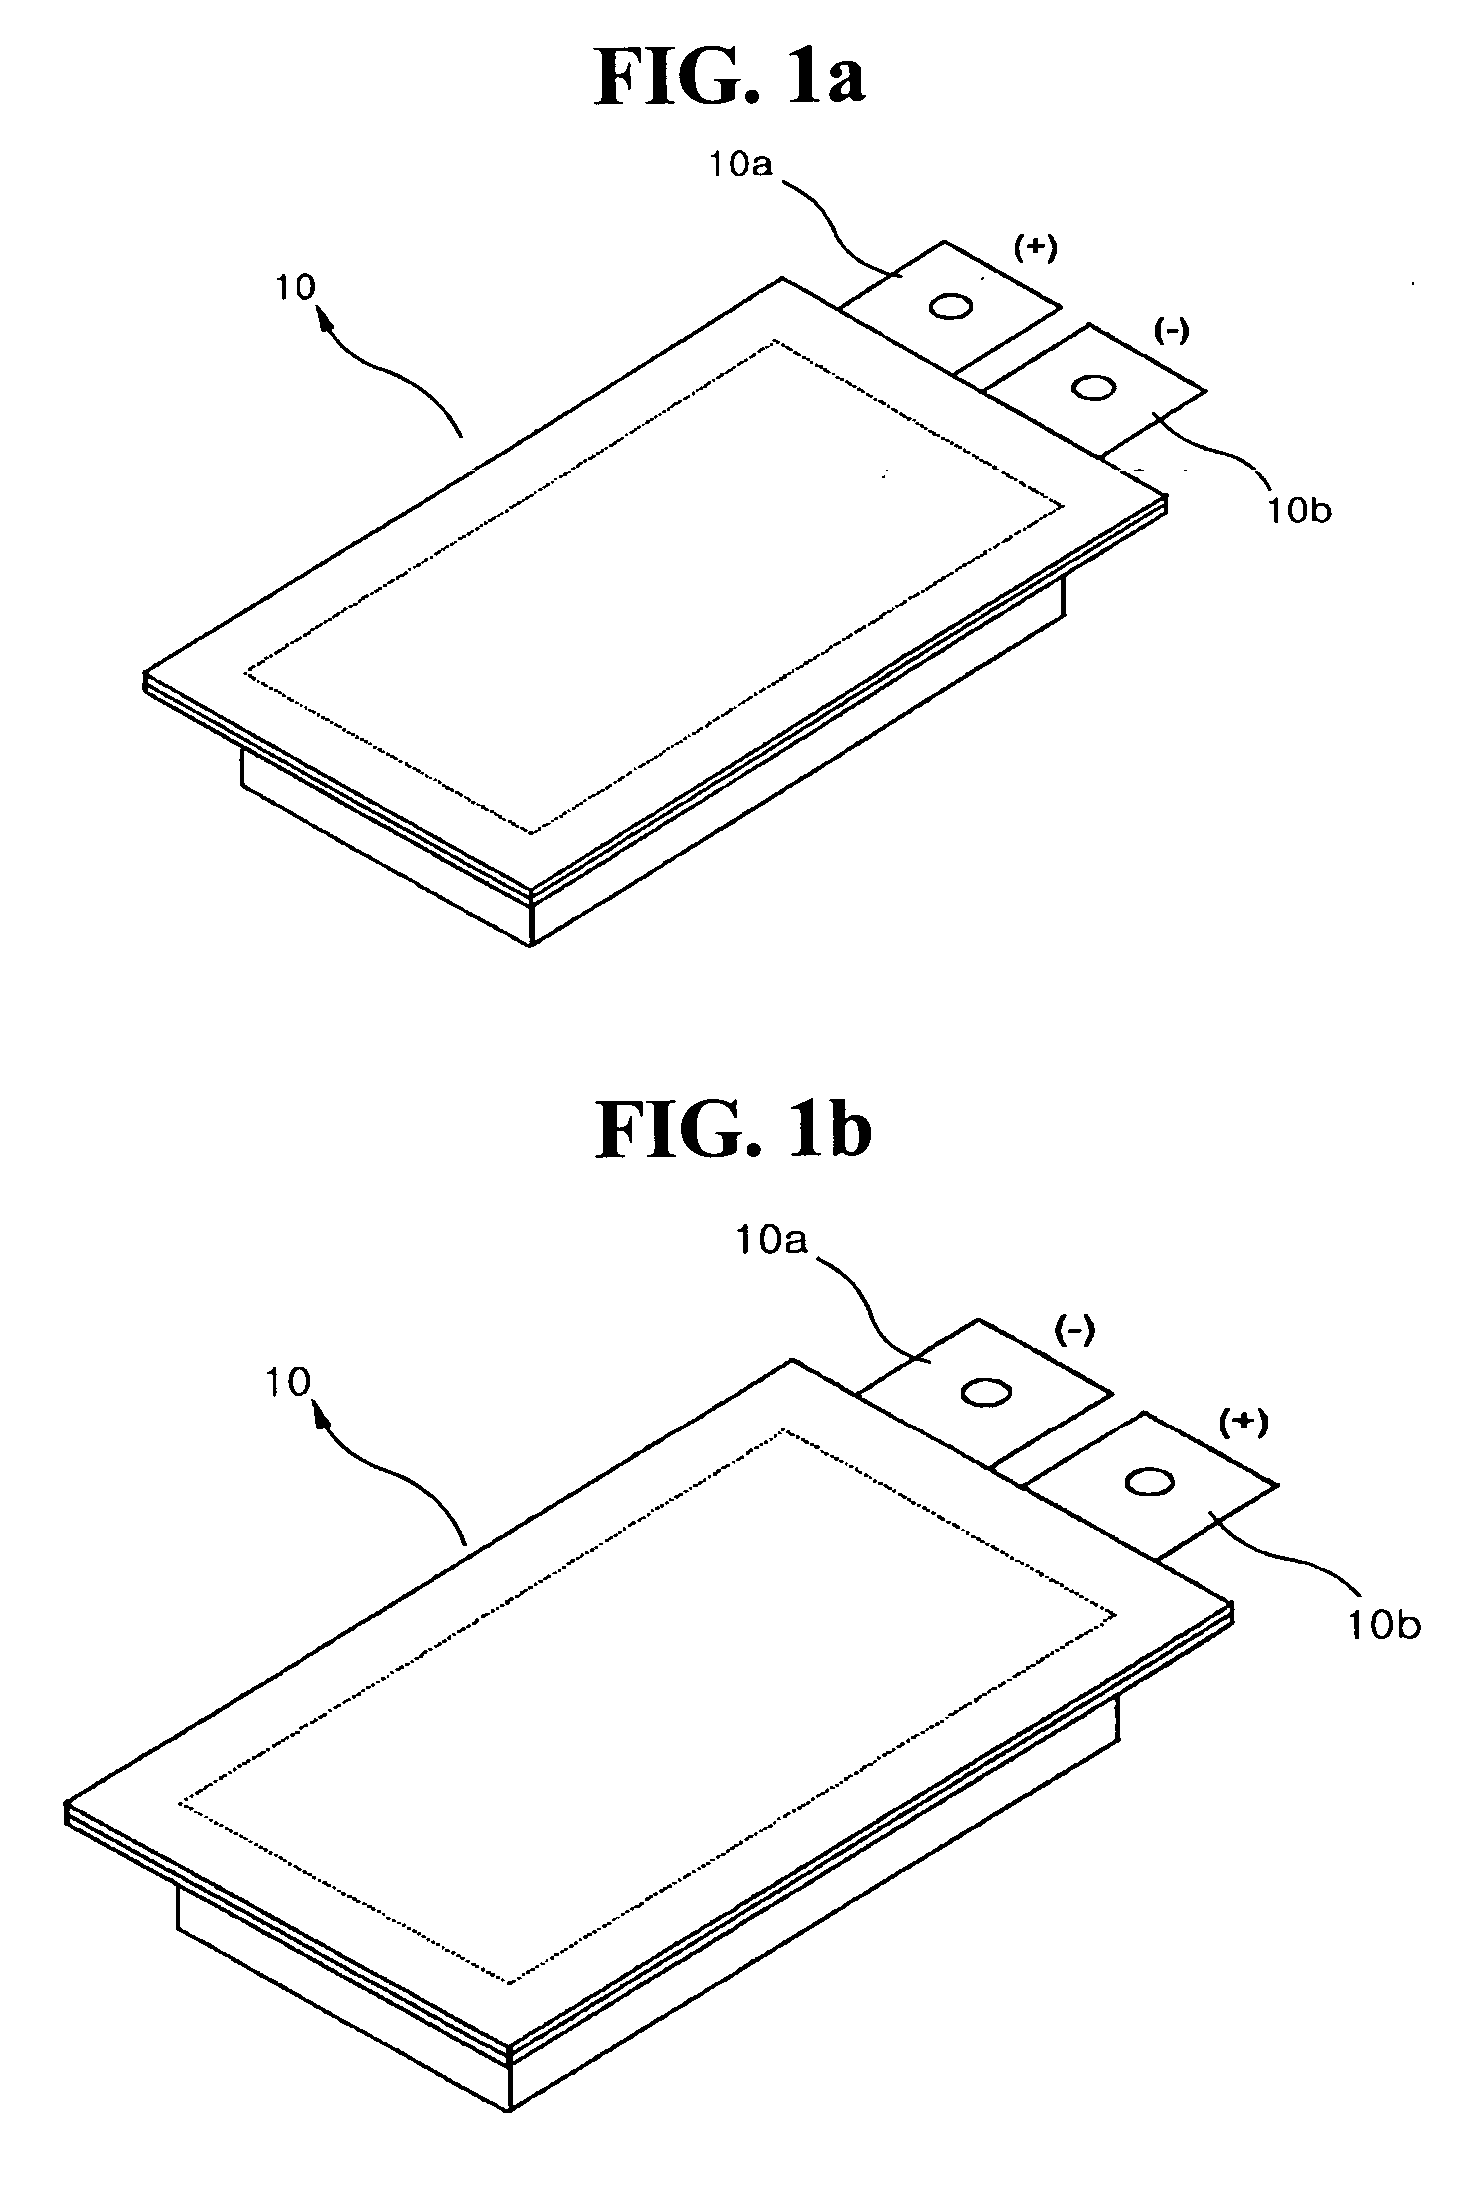 Secondary lithium battery module